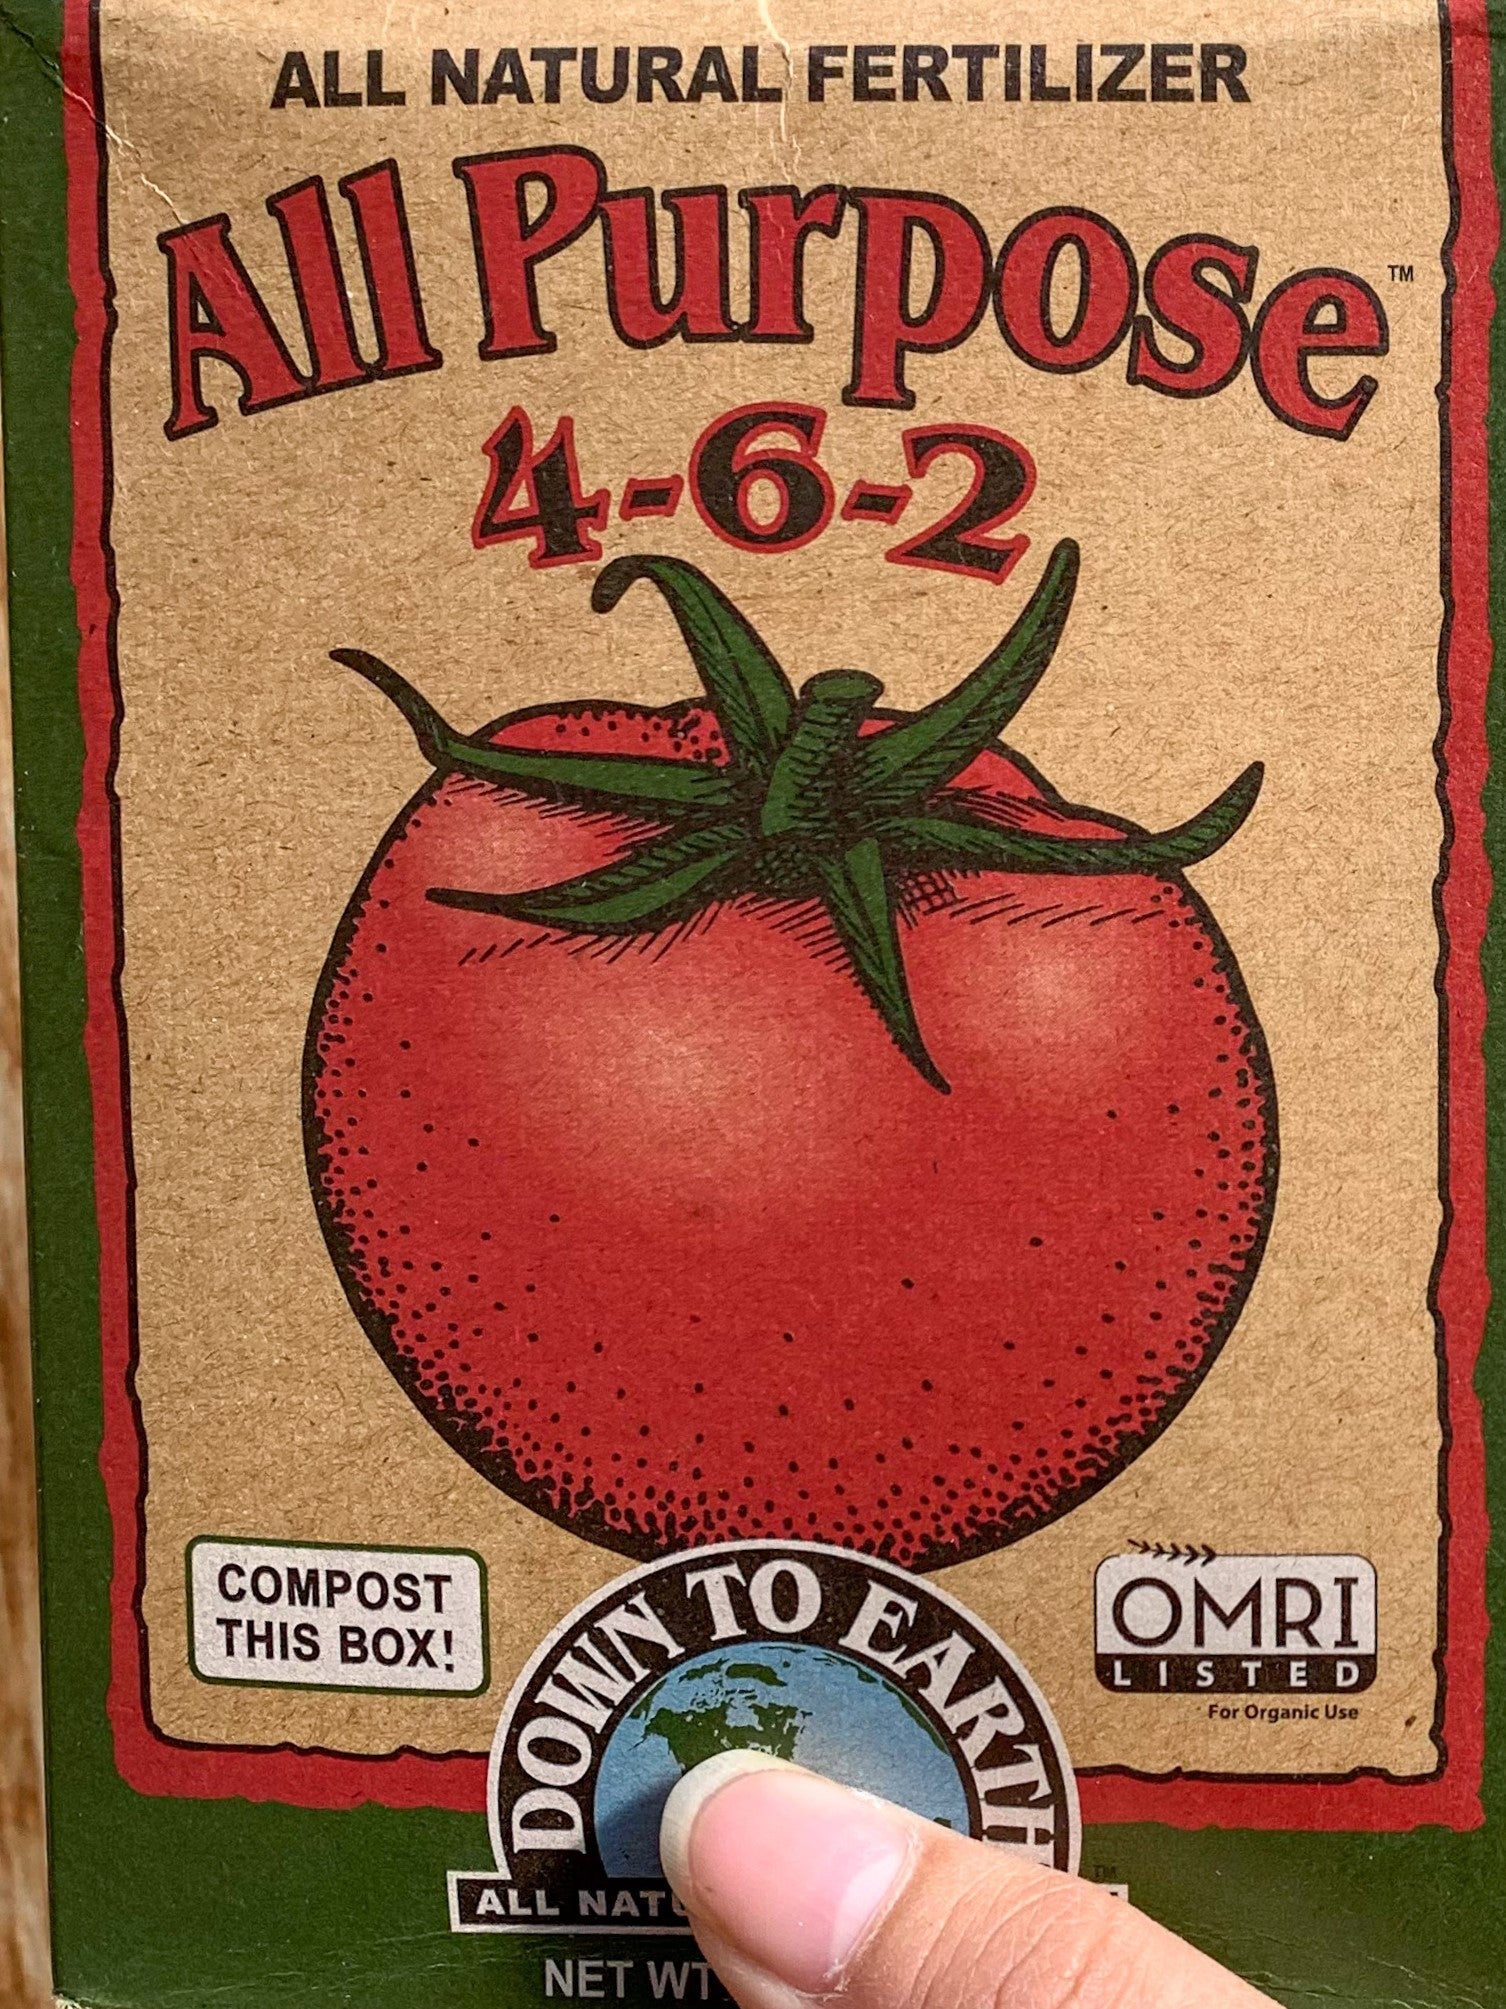 A box of "All Purpose 4-6-2" fertilizer. There is an image of a tomato on the front.